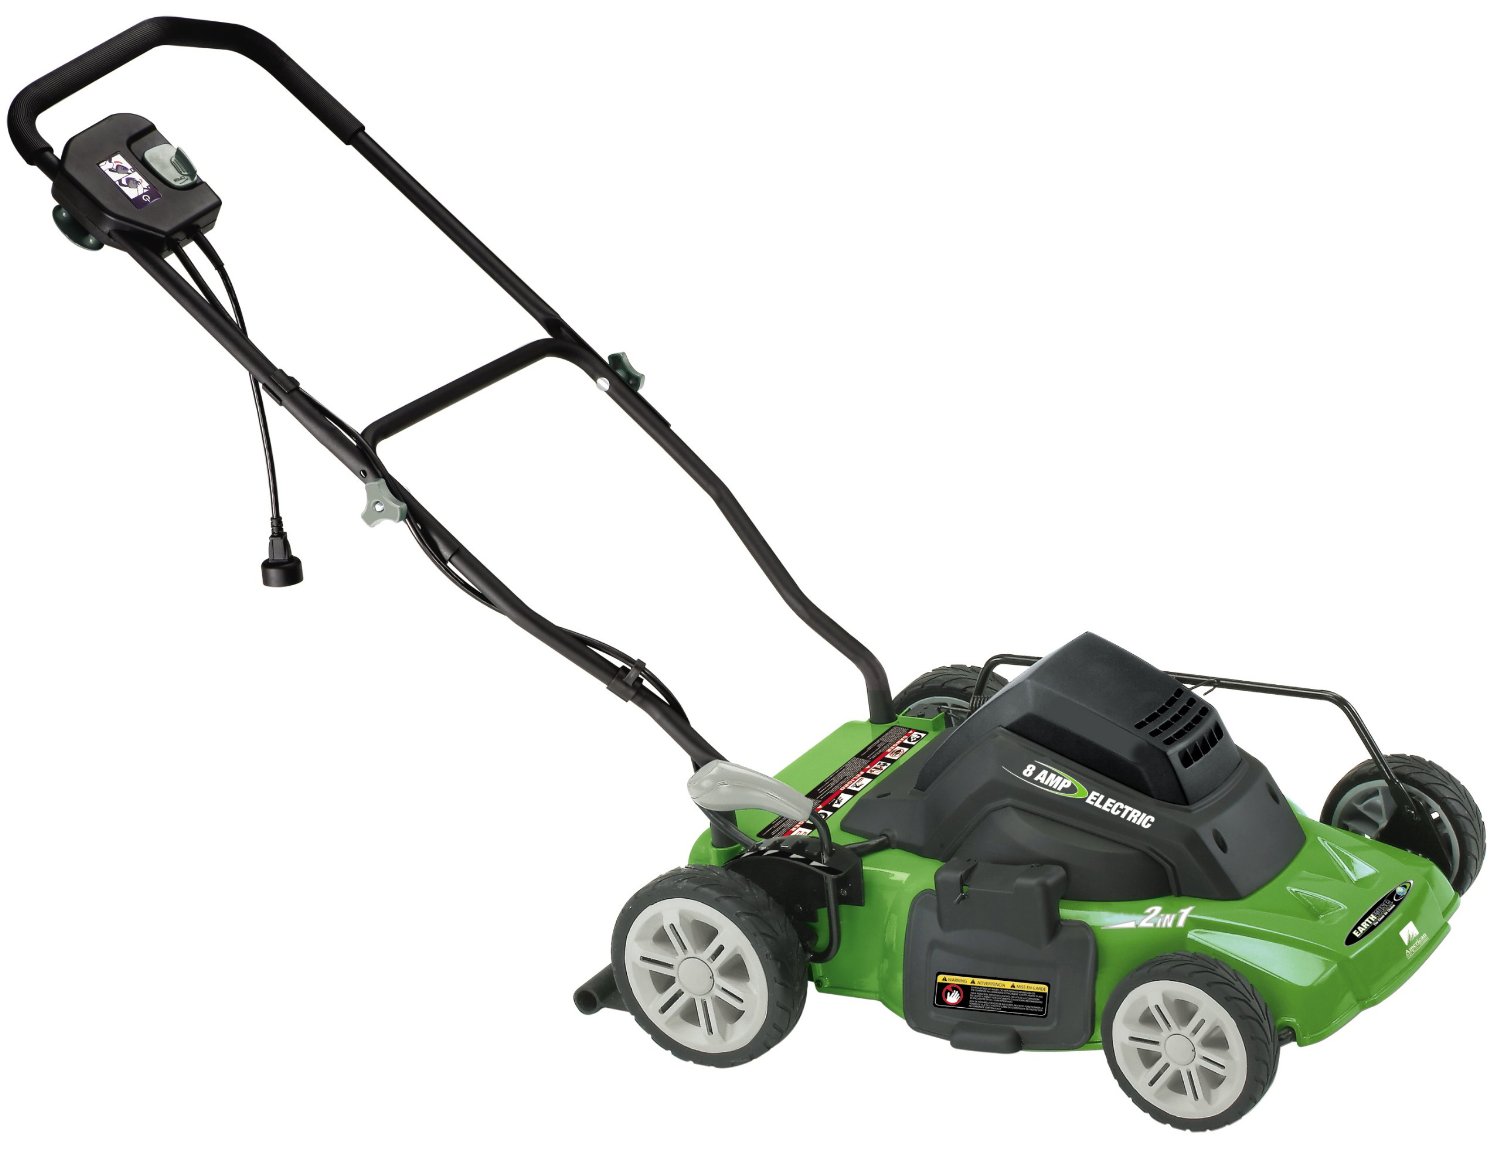 Earthwise 14-Inch 8-Amp Side Discharge/Mulching Corded Electric Lawn Mower